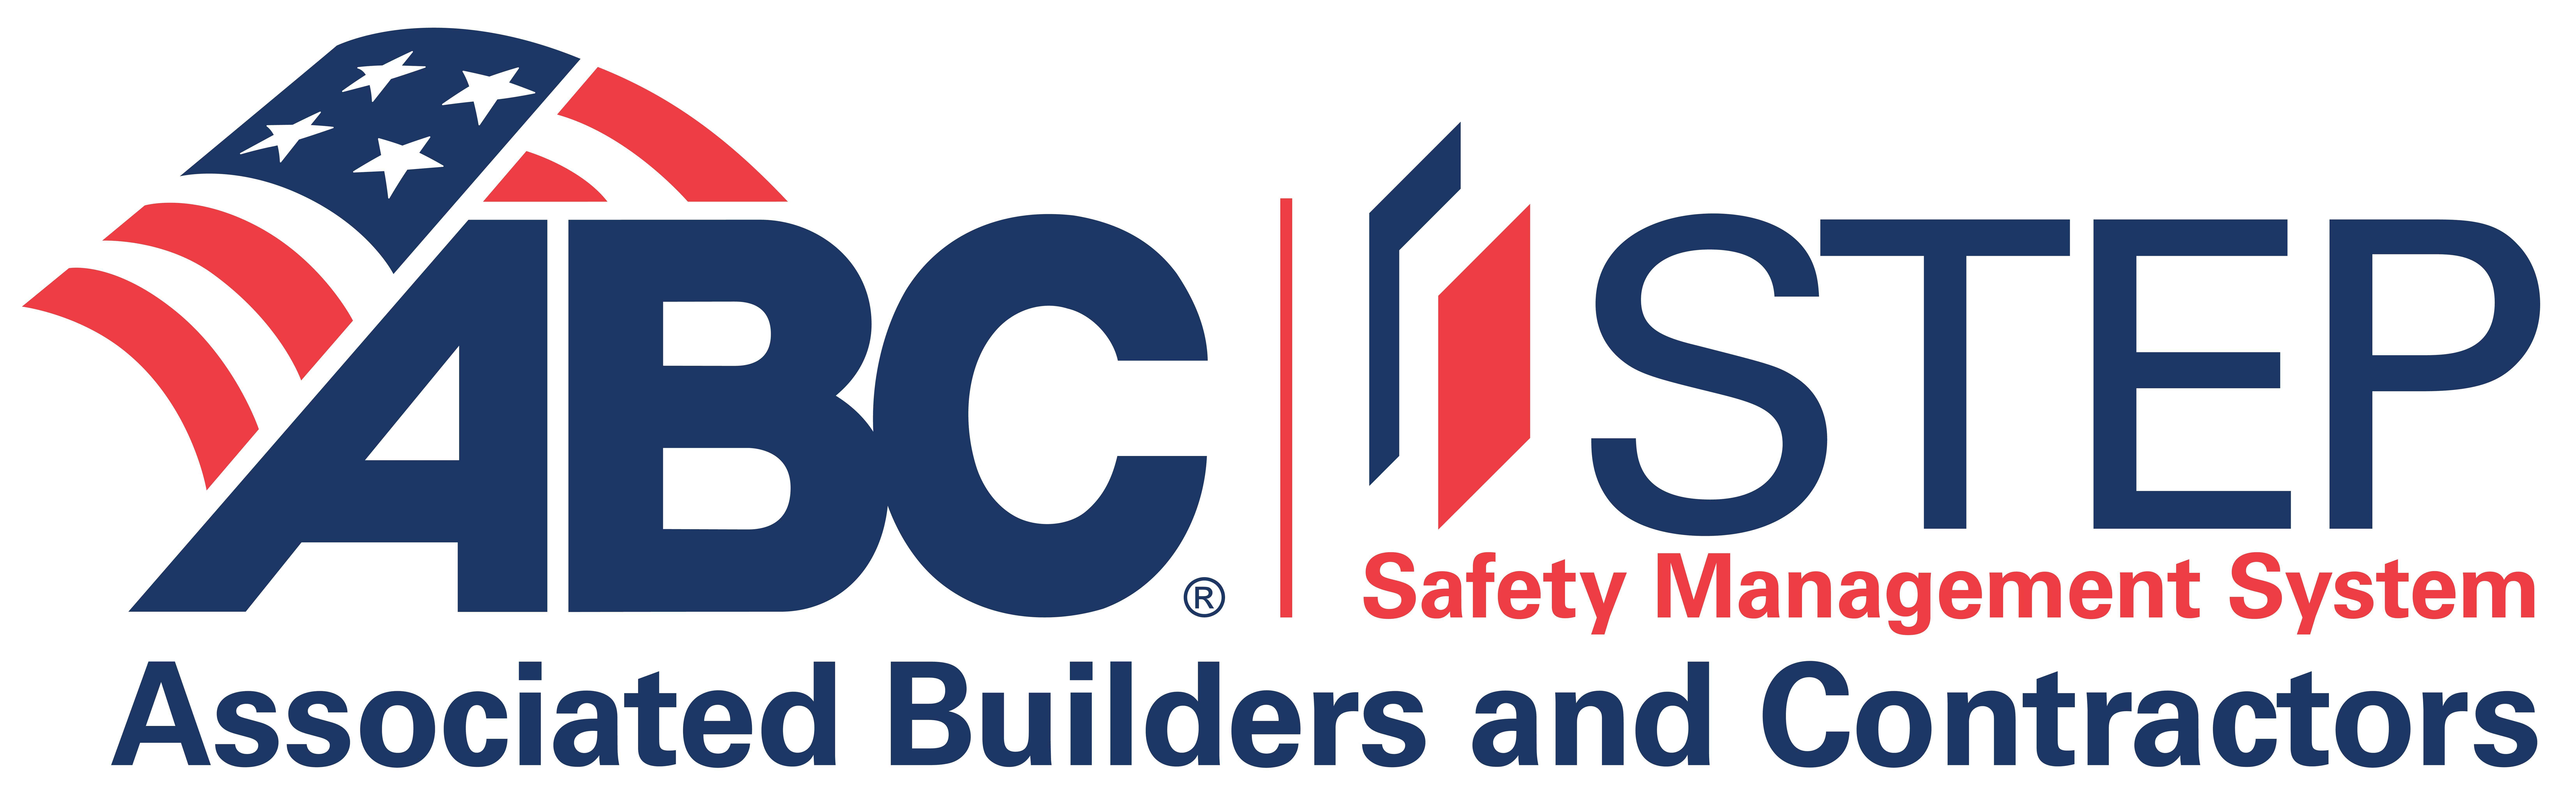 Associated Builders and Contractors Step Safety Management System